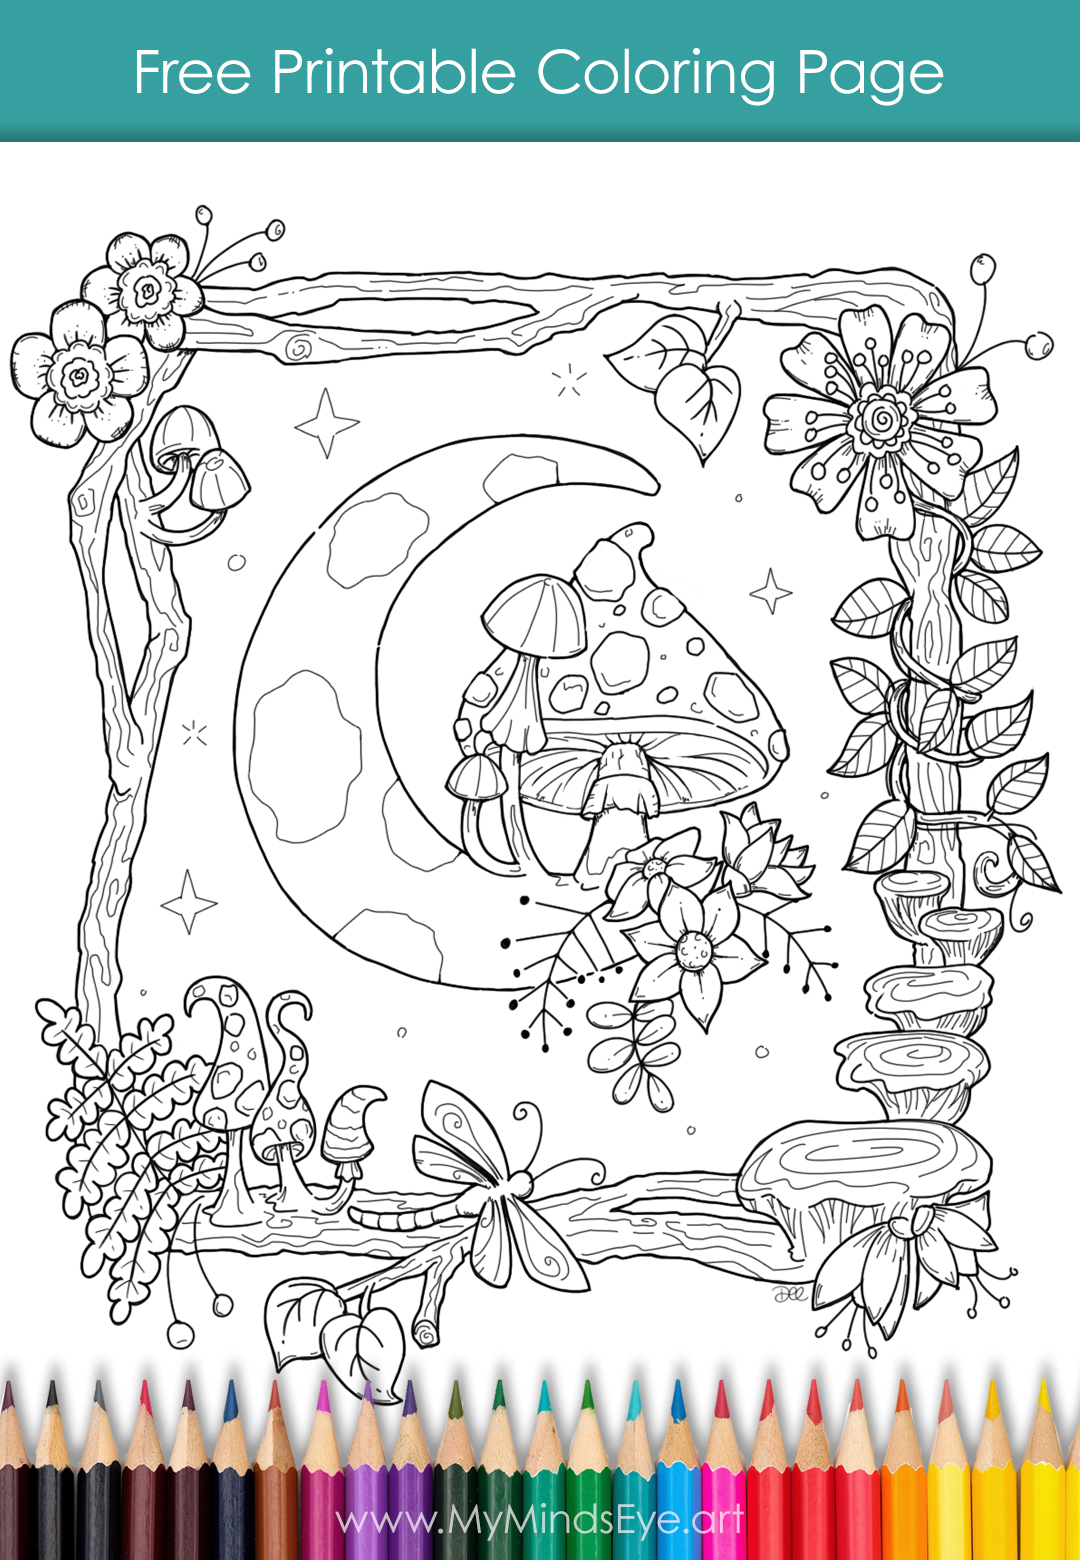 Fantasy coloring page with mushrooms sitting on a moon.